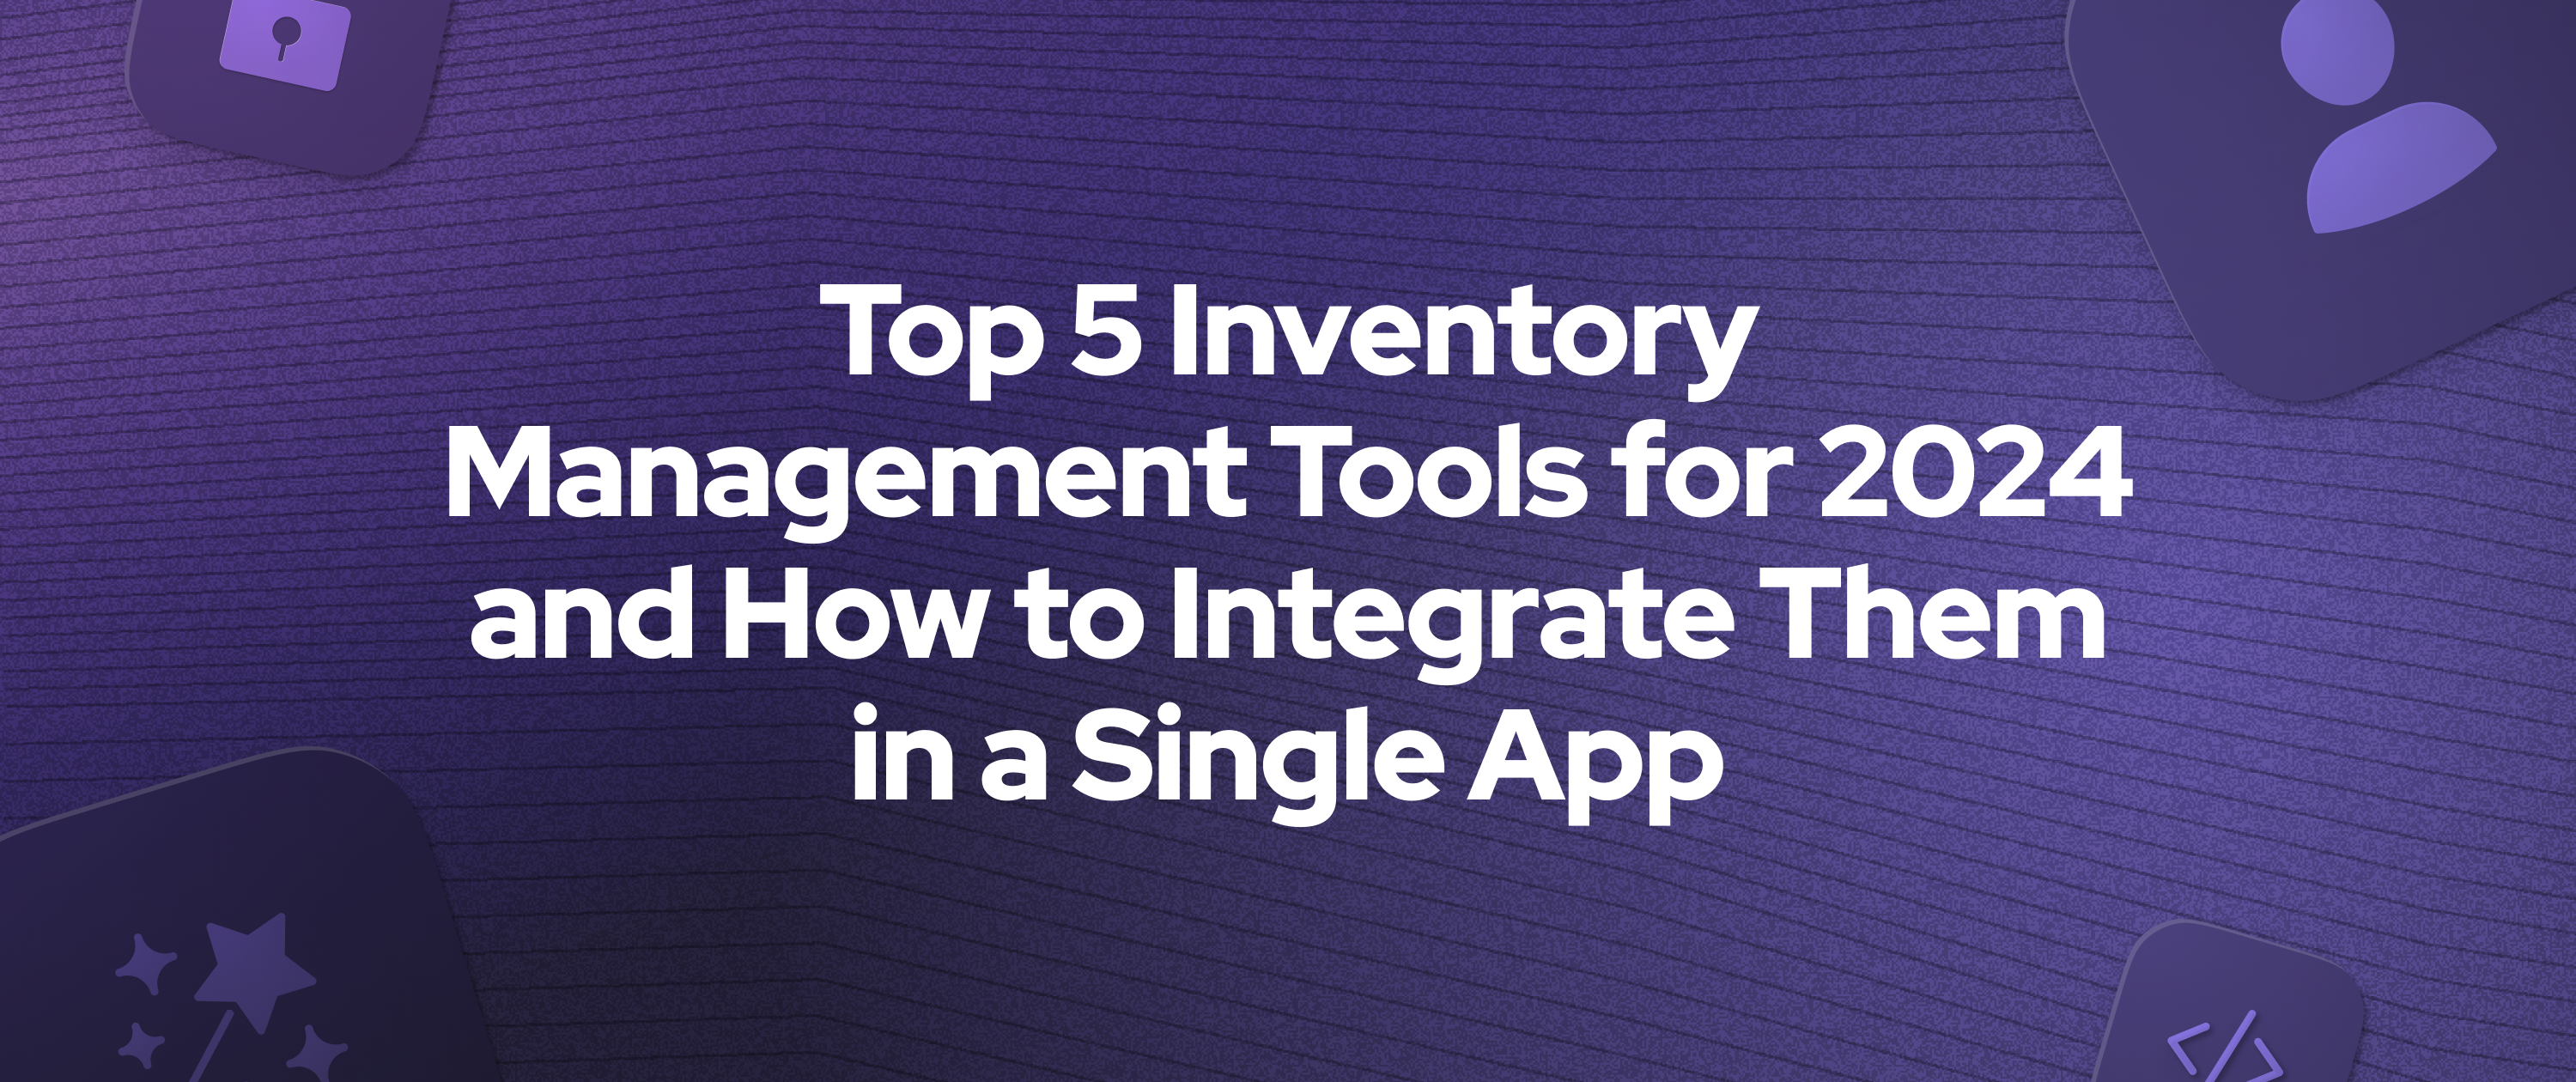 Top 5 Inventory Management Tools for 2024 and How to Integrate Them in a Single App 